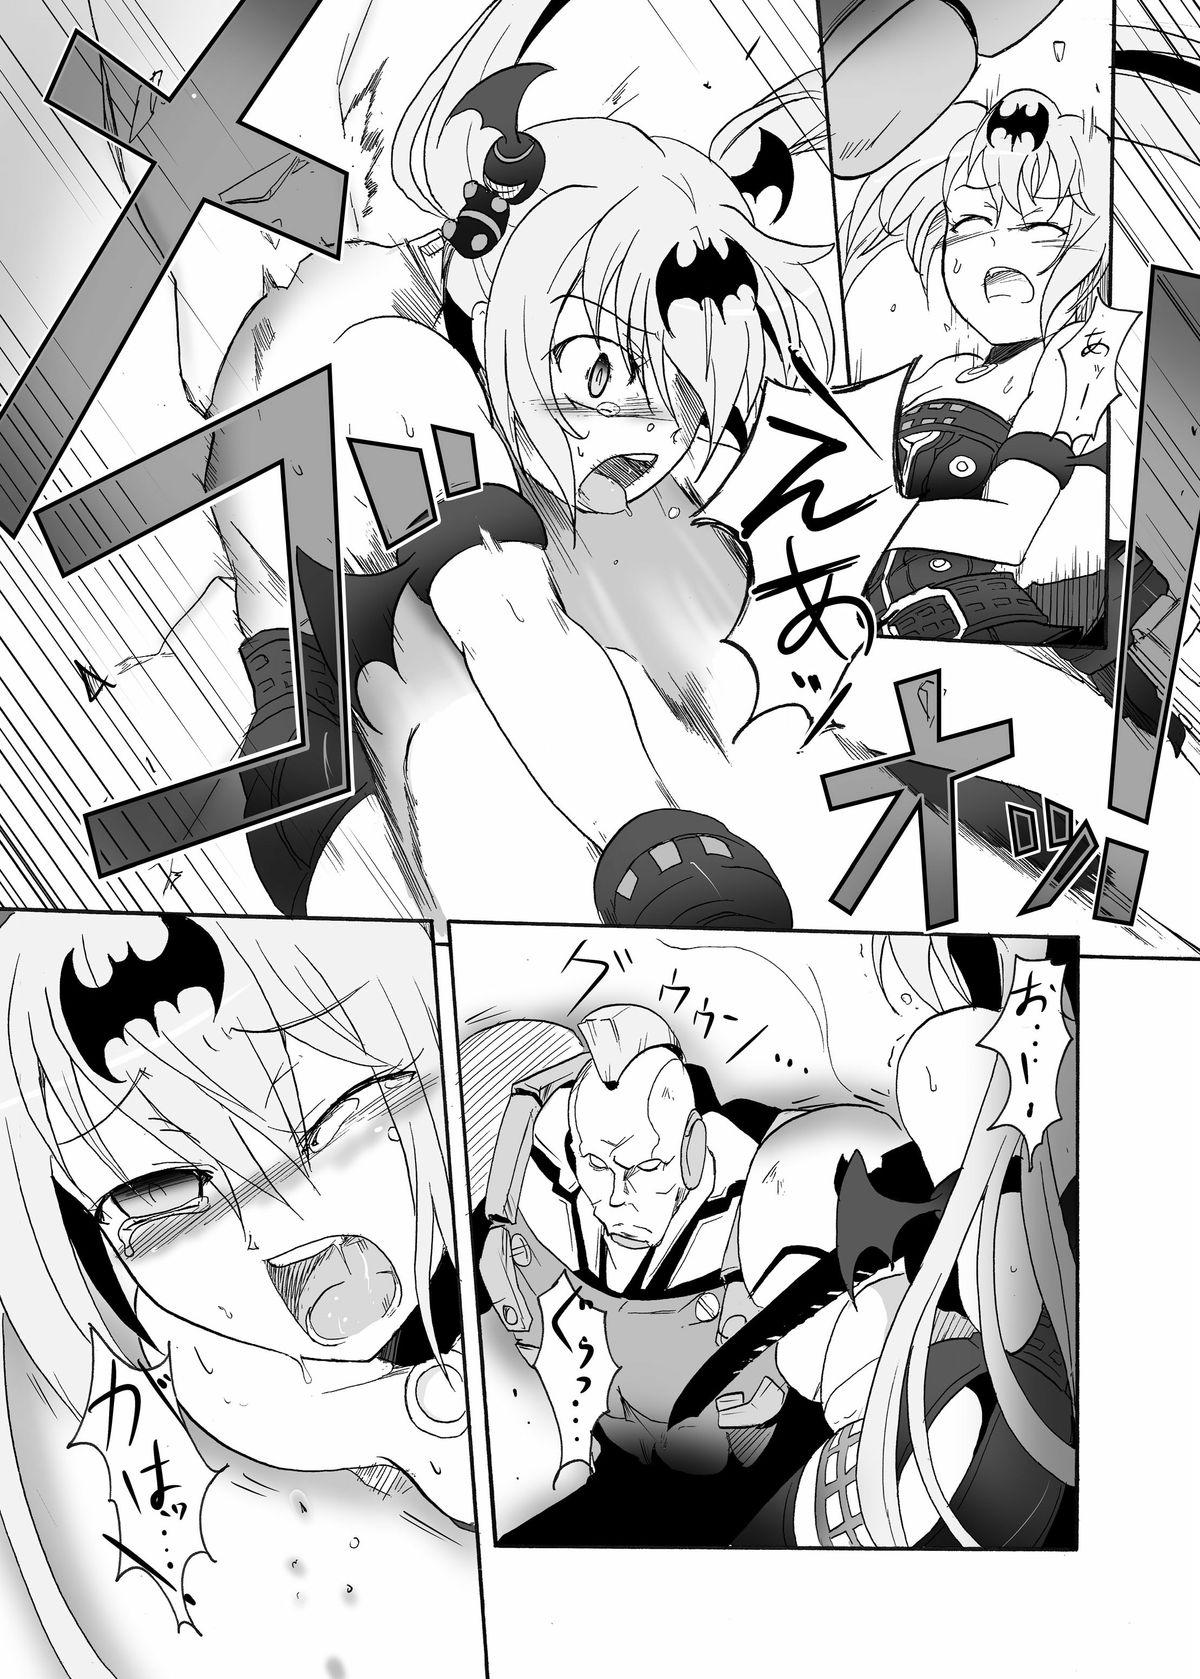 Chile SPIRAL BLOW! - Queens blade Ginger - Page 6